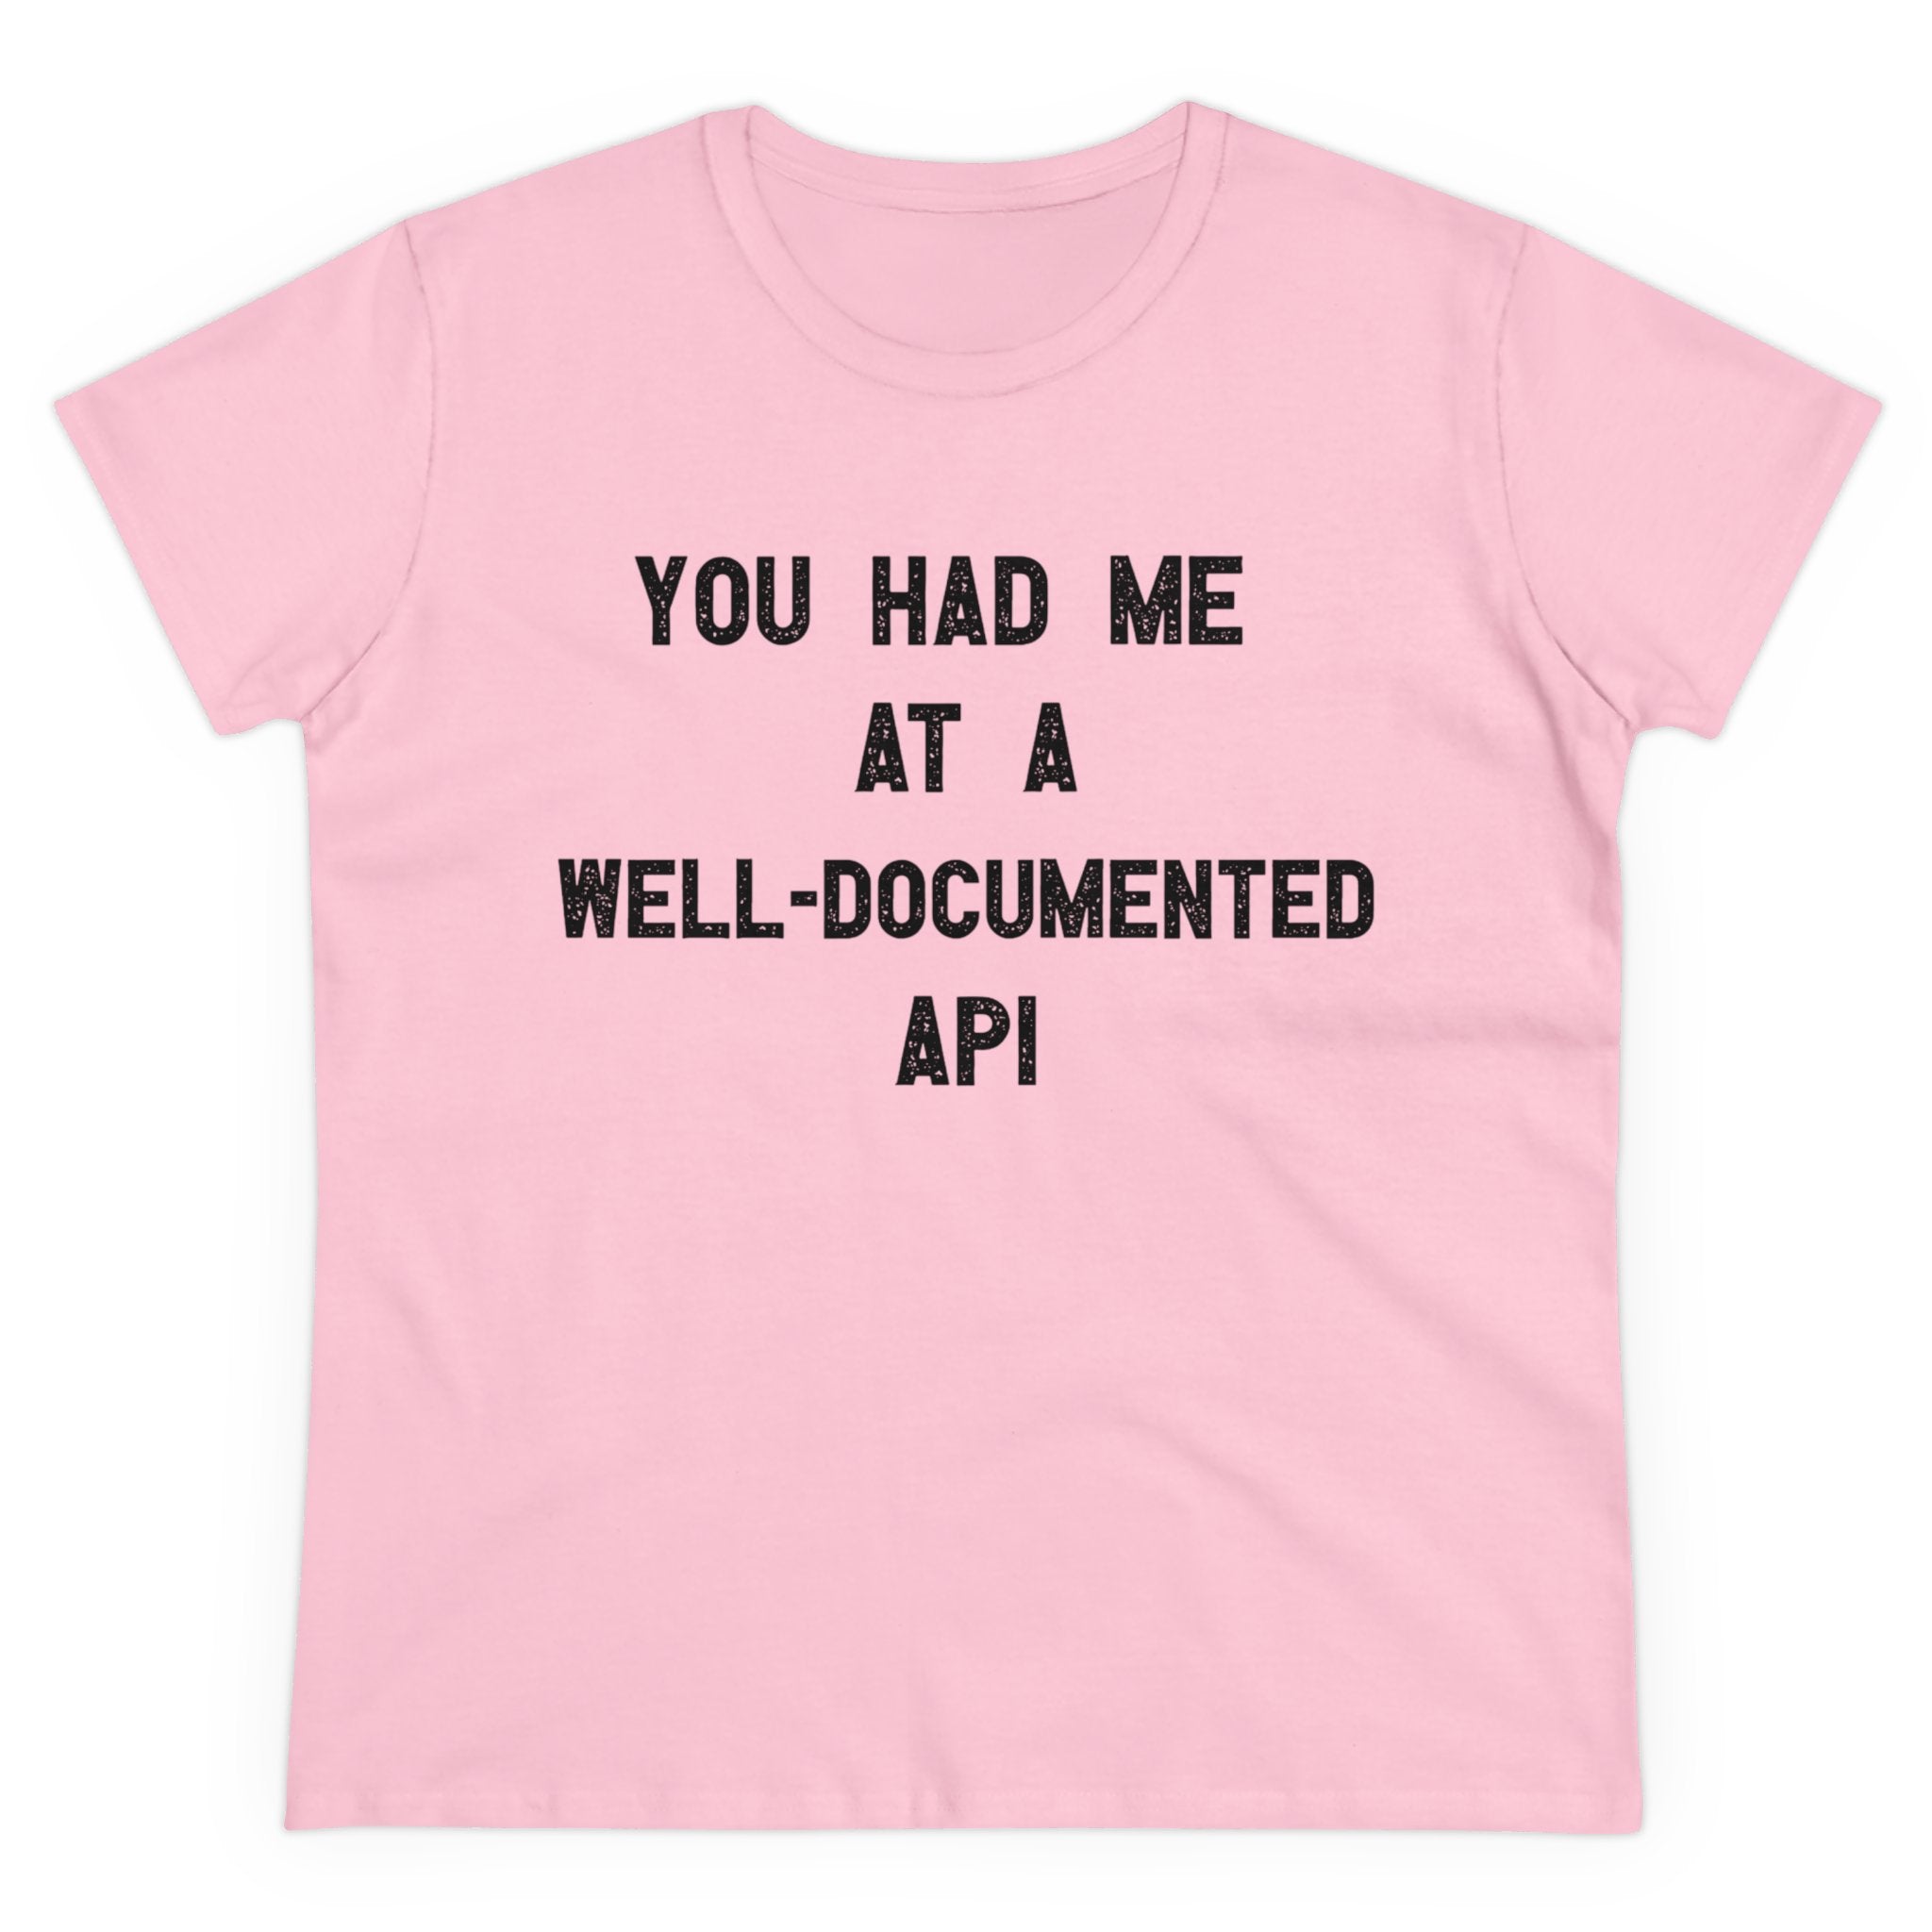 You Had Me At A Well-Documented API - Women's Tee